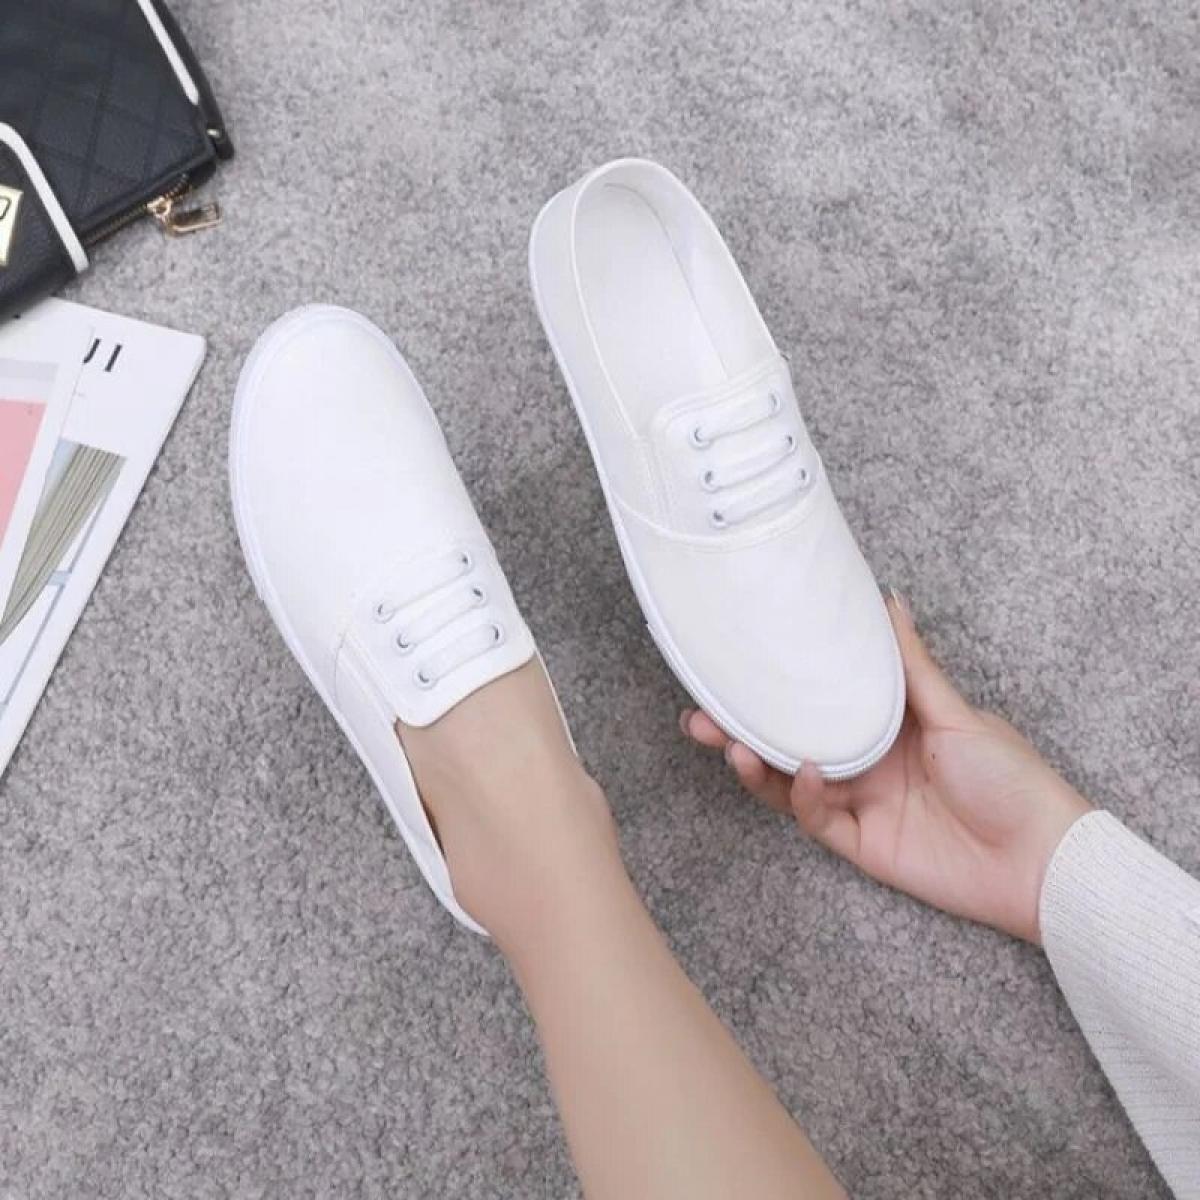 Women  Canvas Slip On Flat Shoes Ladies Black Loafer Black Woman Sneakers Casual Shoes Flats Non Slip One Stepper Canvas